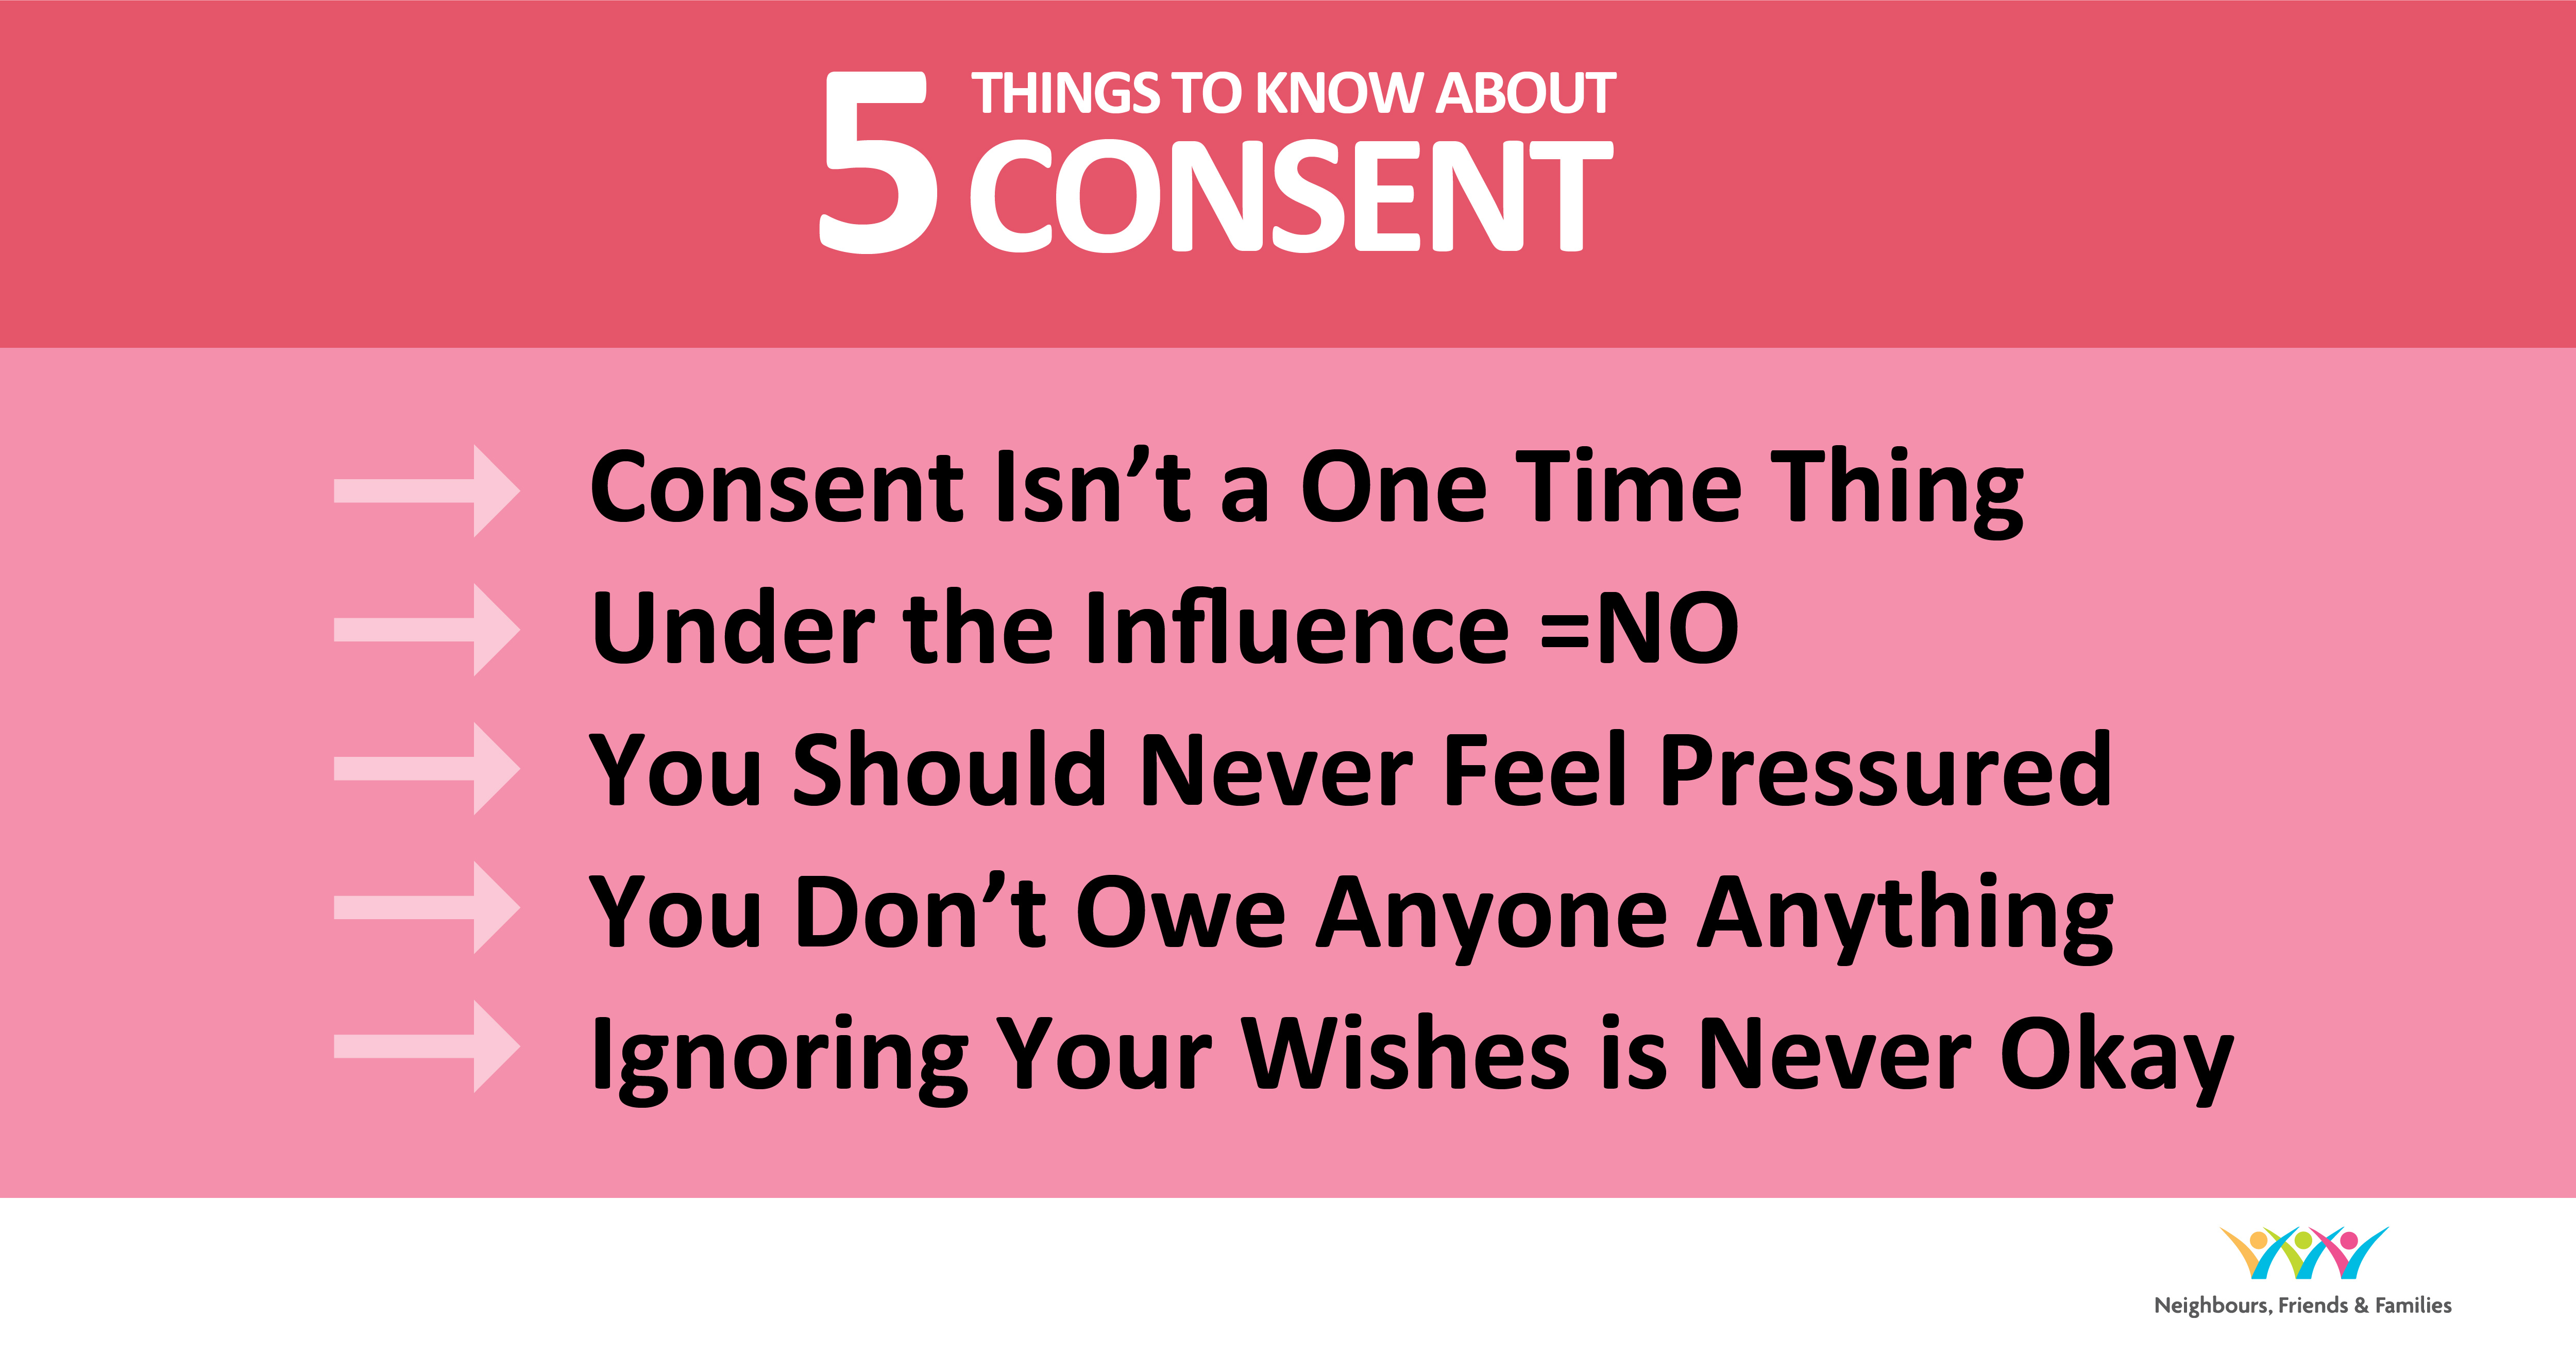 5 Things to Know About Consent